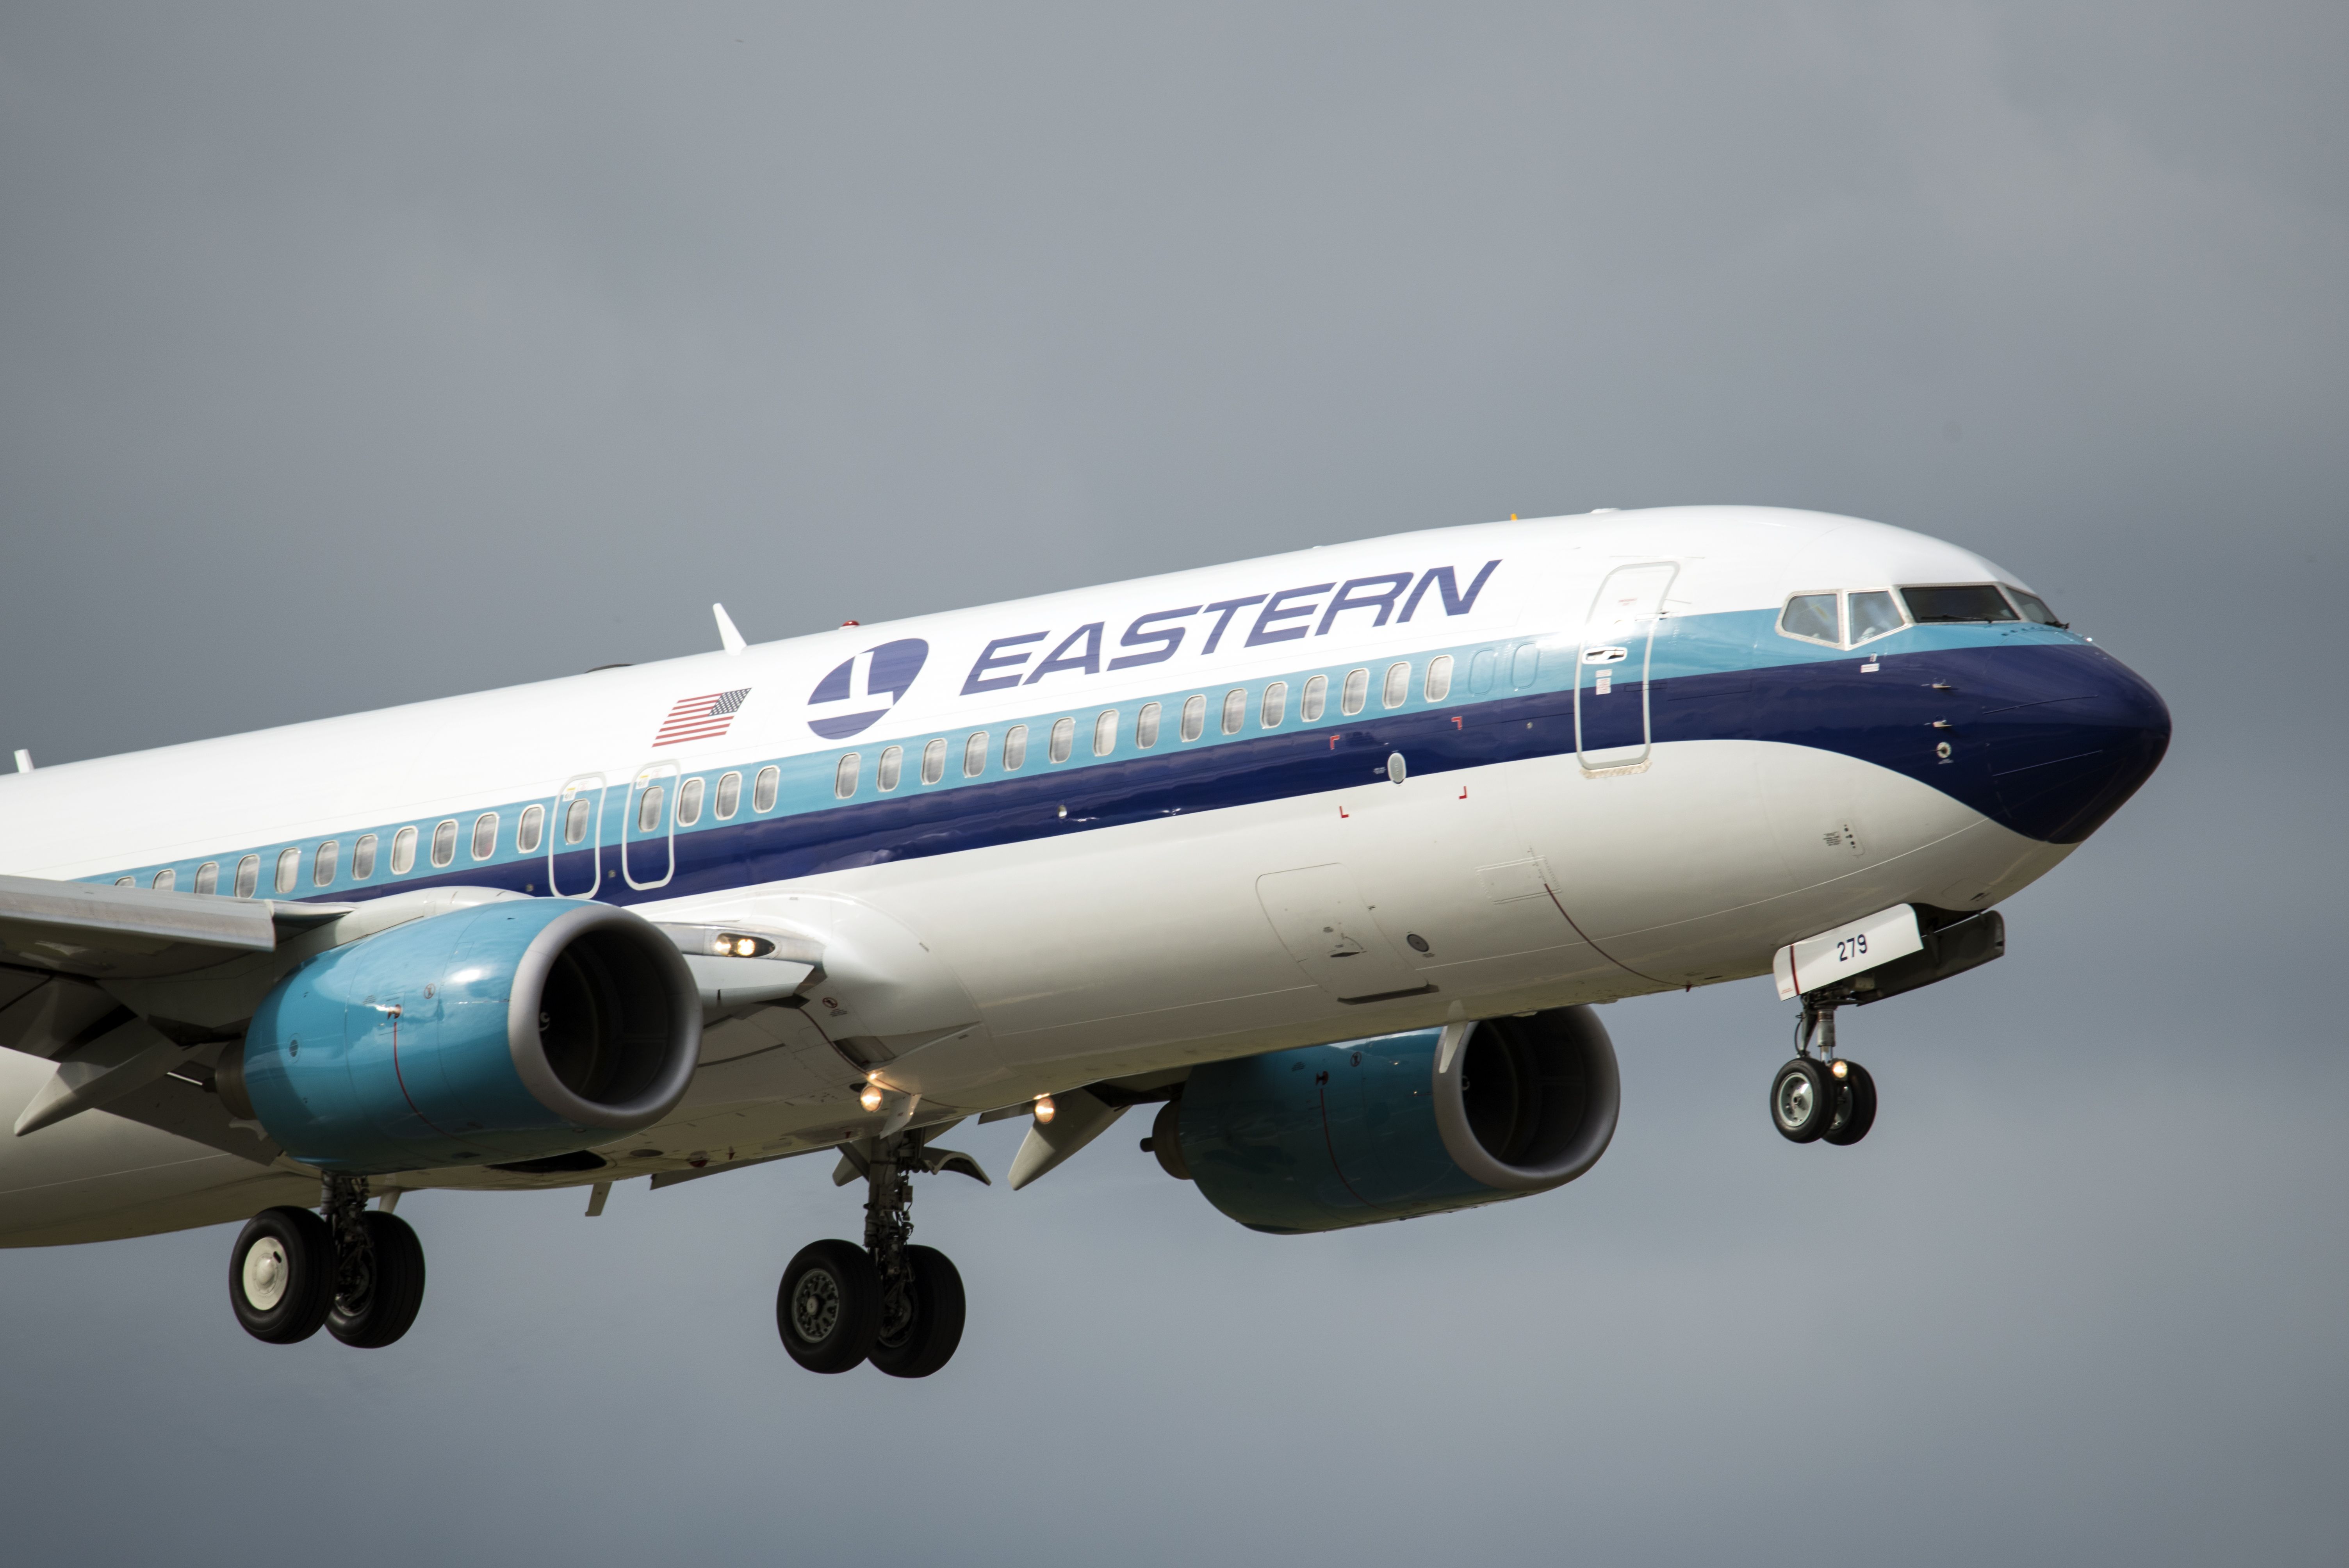 An Eastern Airlines aircraft